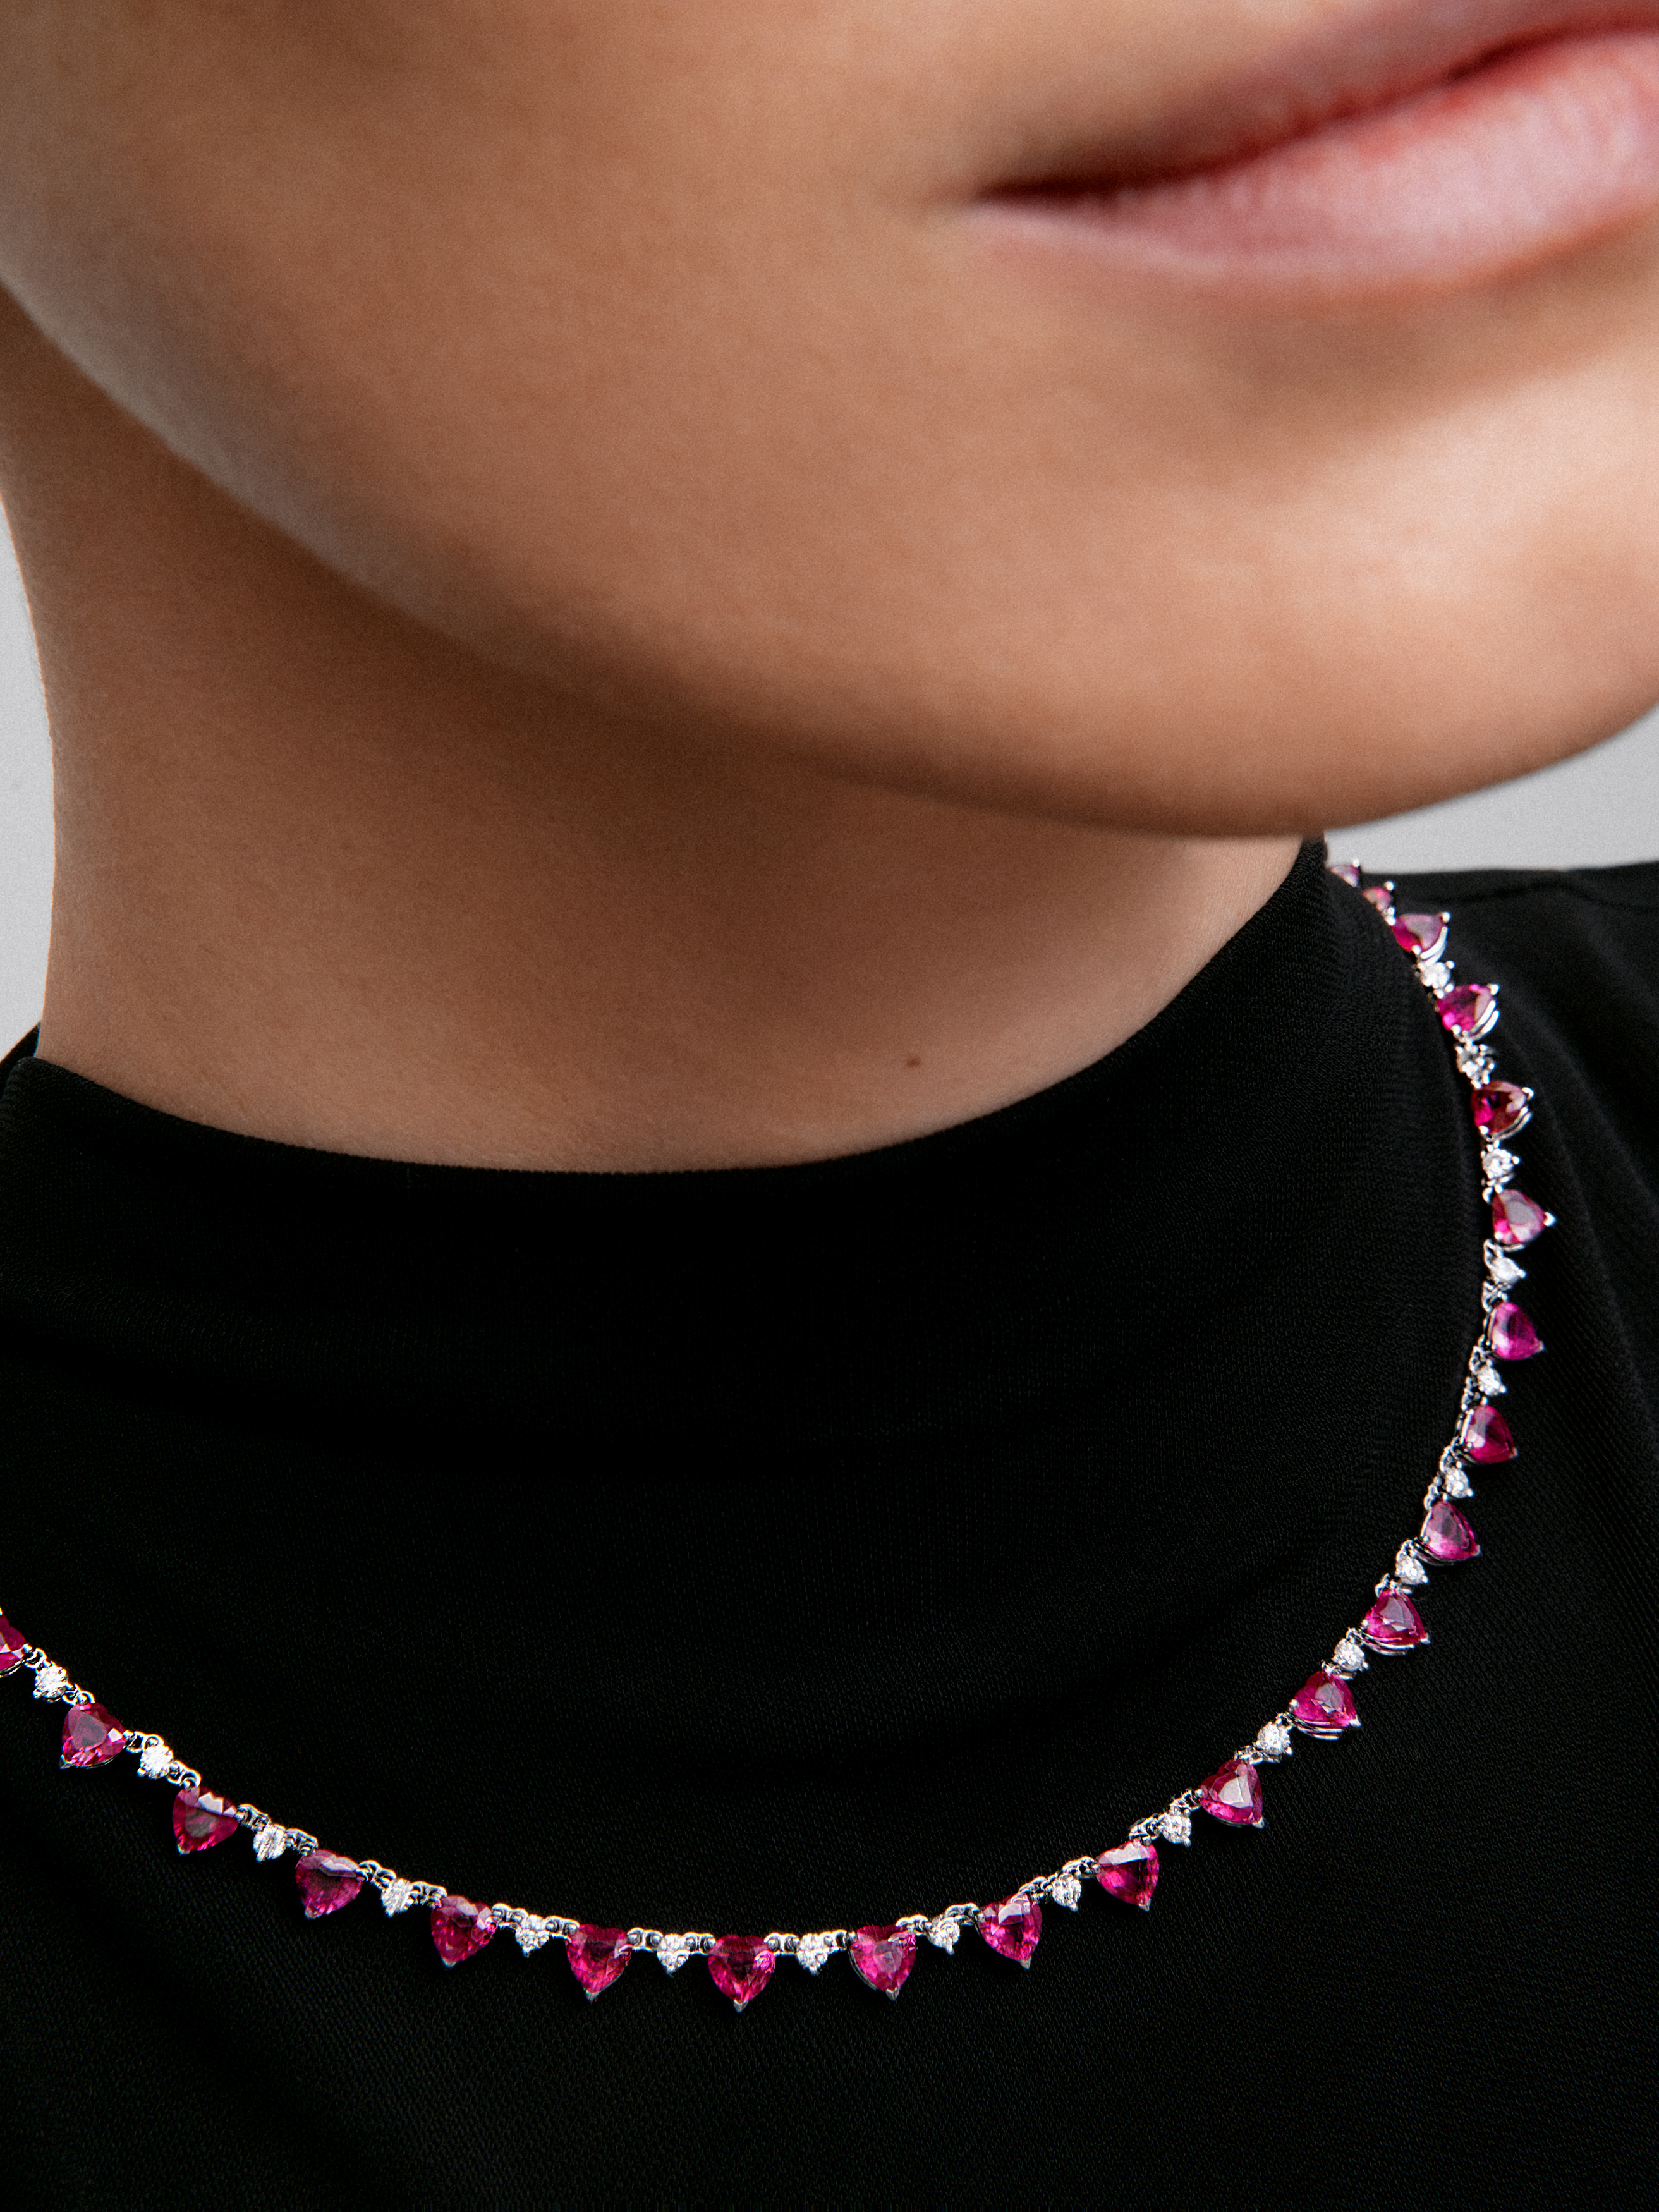 18K white gold necklace with red ruby ​​with 17.03 cts and white diamonds in bright 1.3 cts diamonds